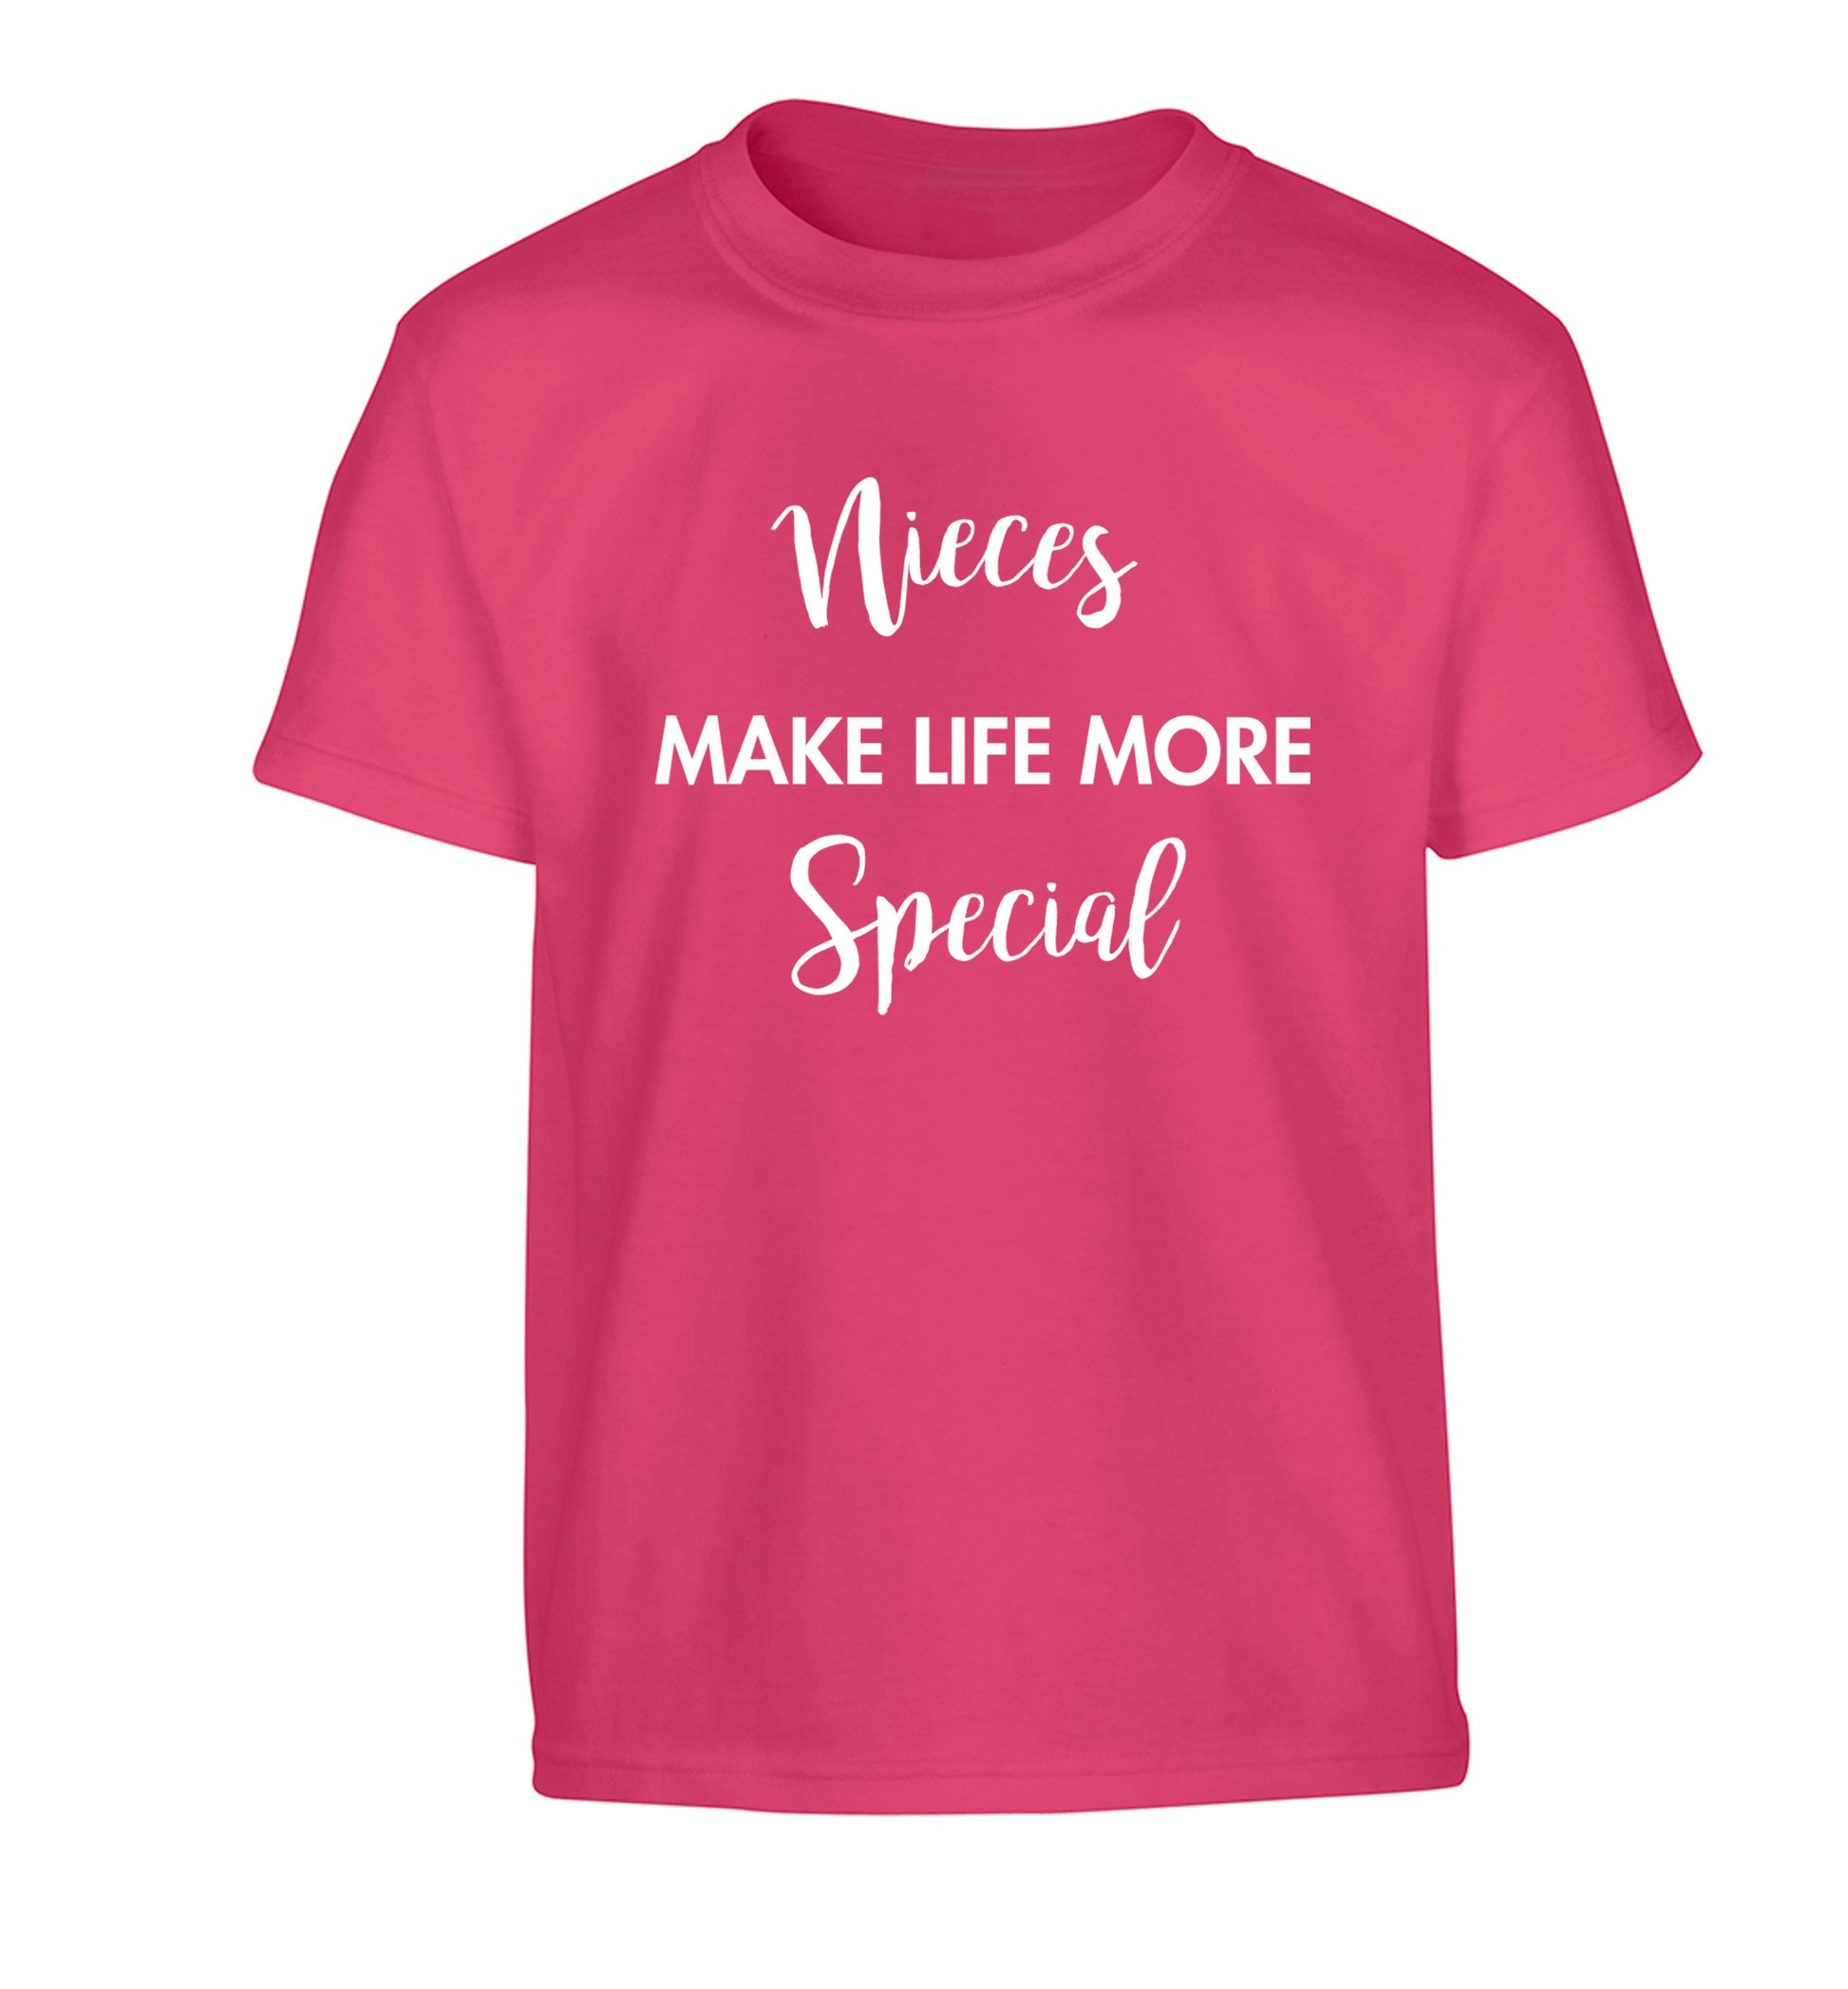 Nieces make life more special Children's pink Tshirt 12-14 Years